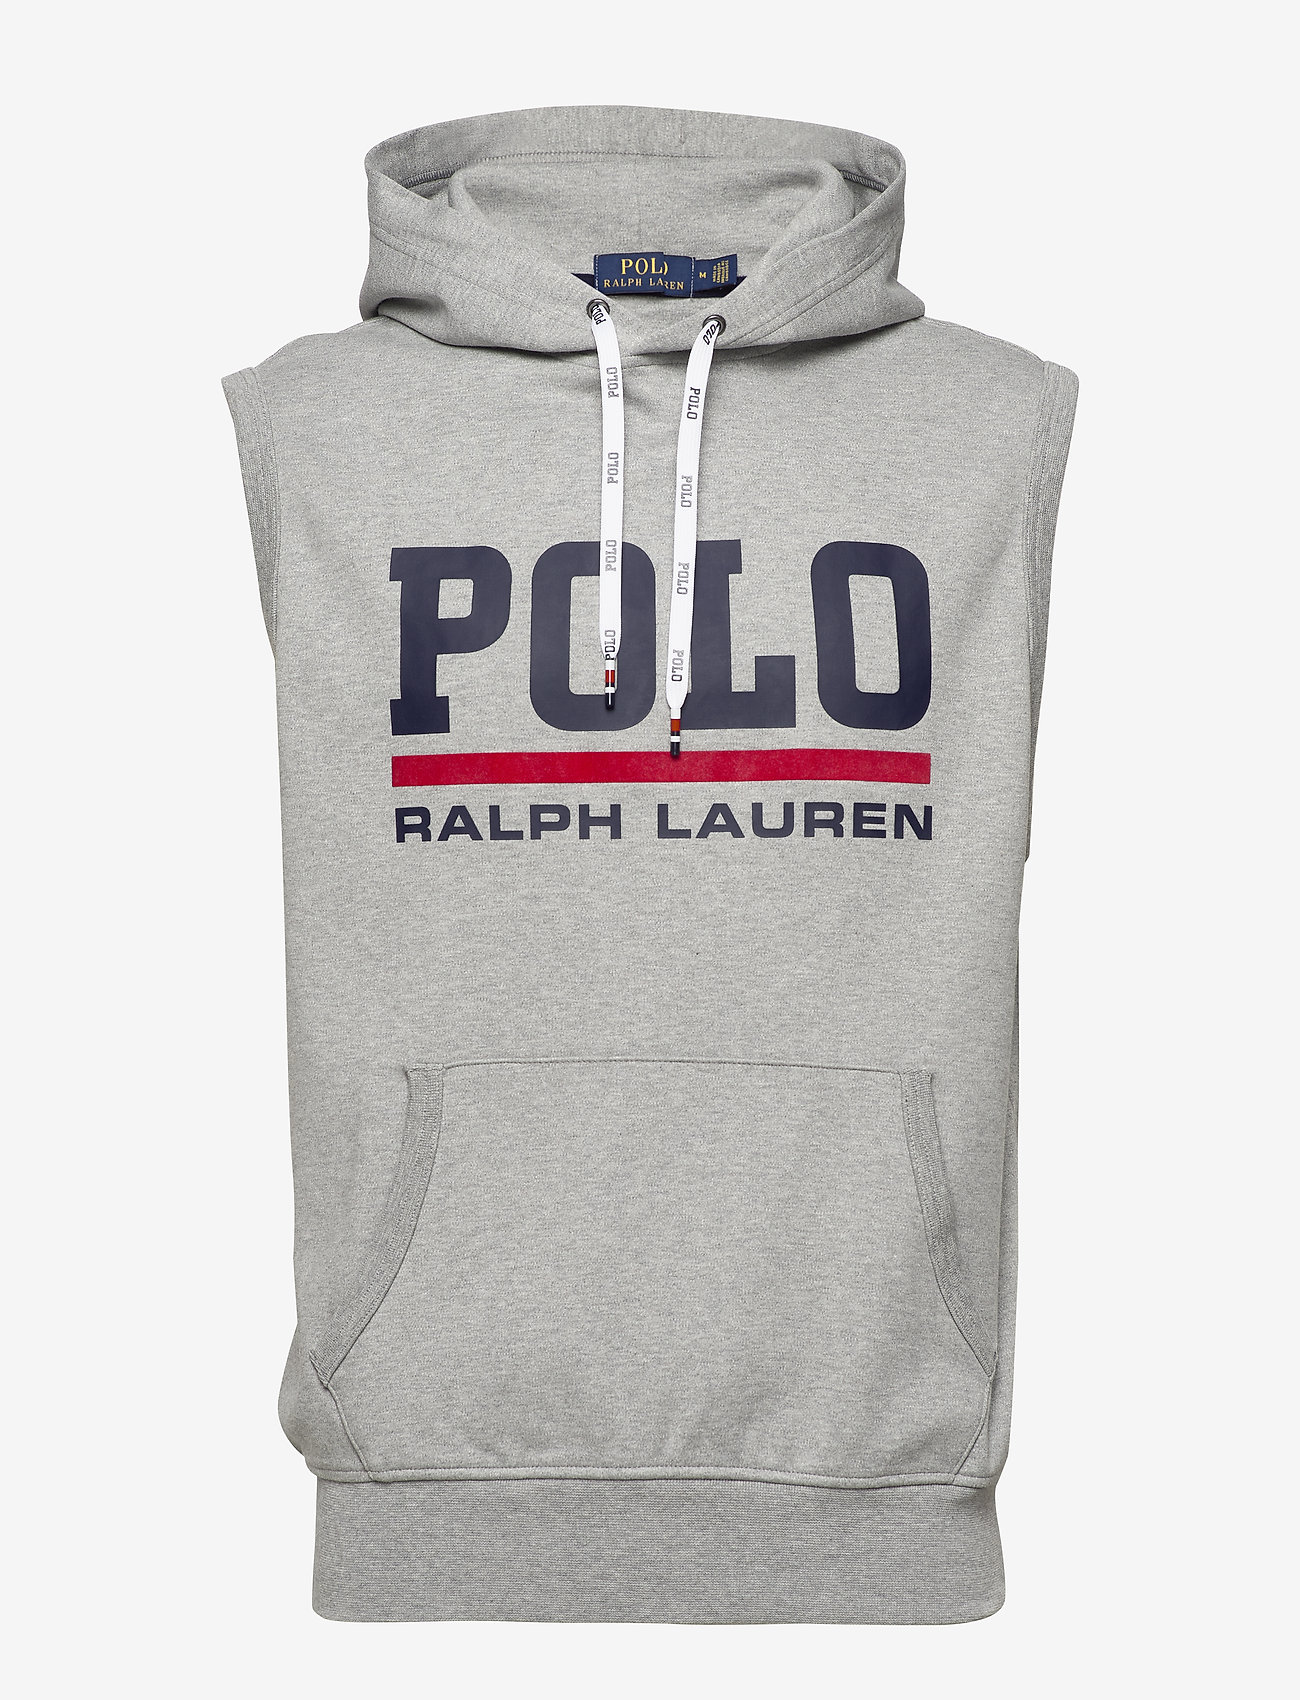 polo vest with hoodie